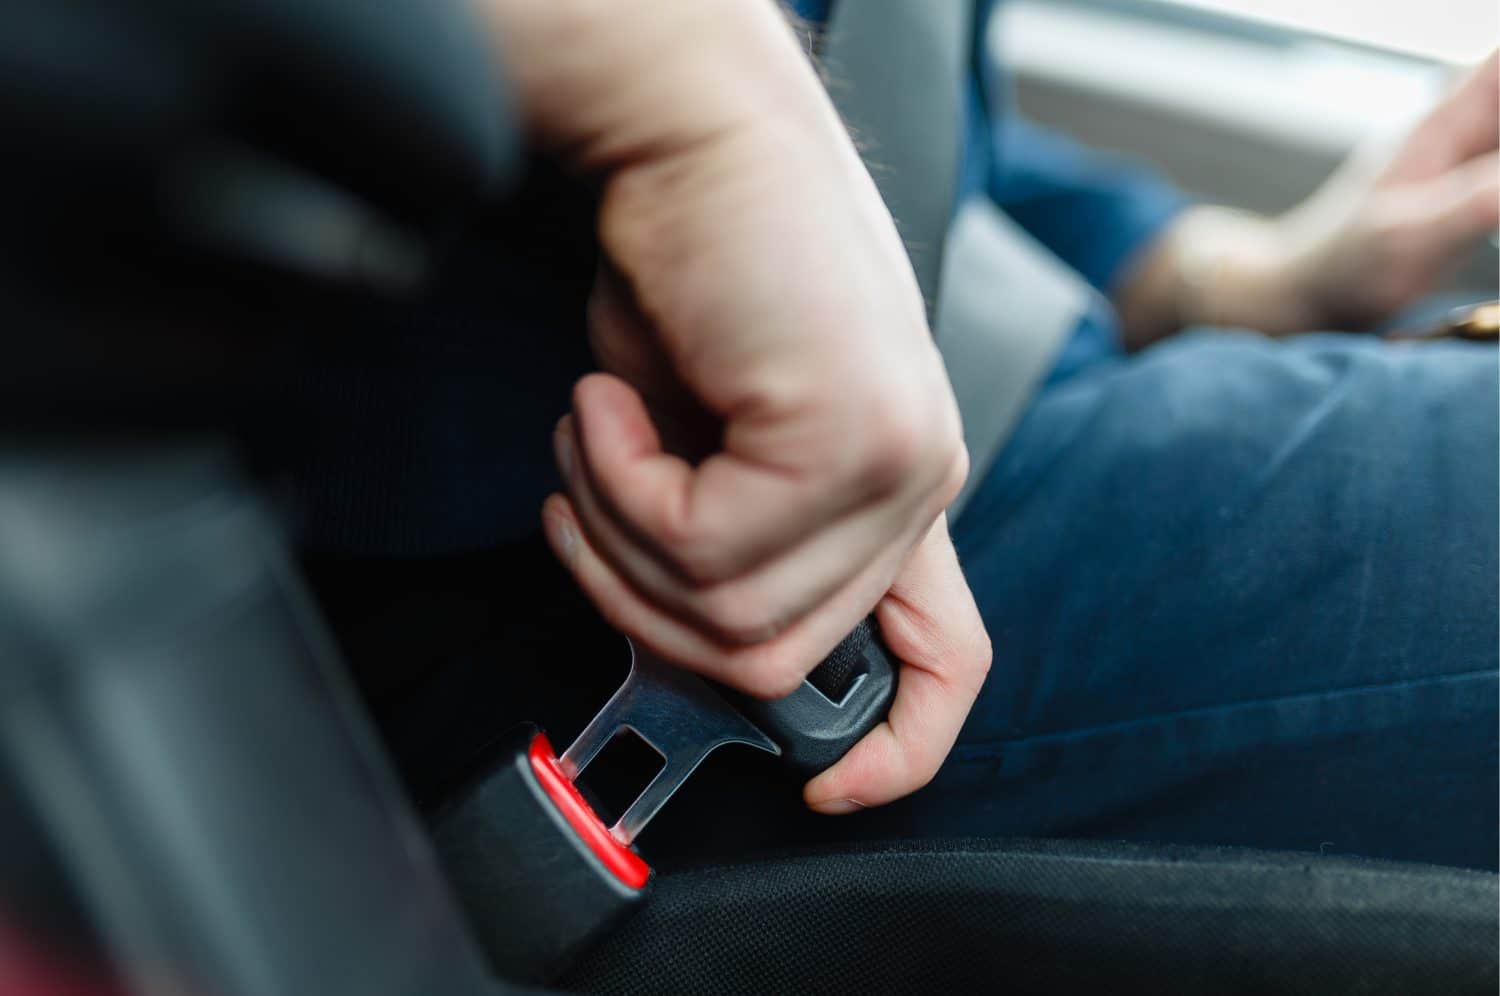 I Wasn't Wearing a Seat Belt During a Crash. Now What?